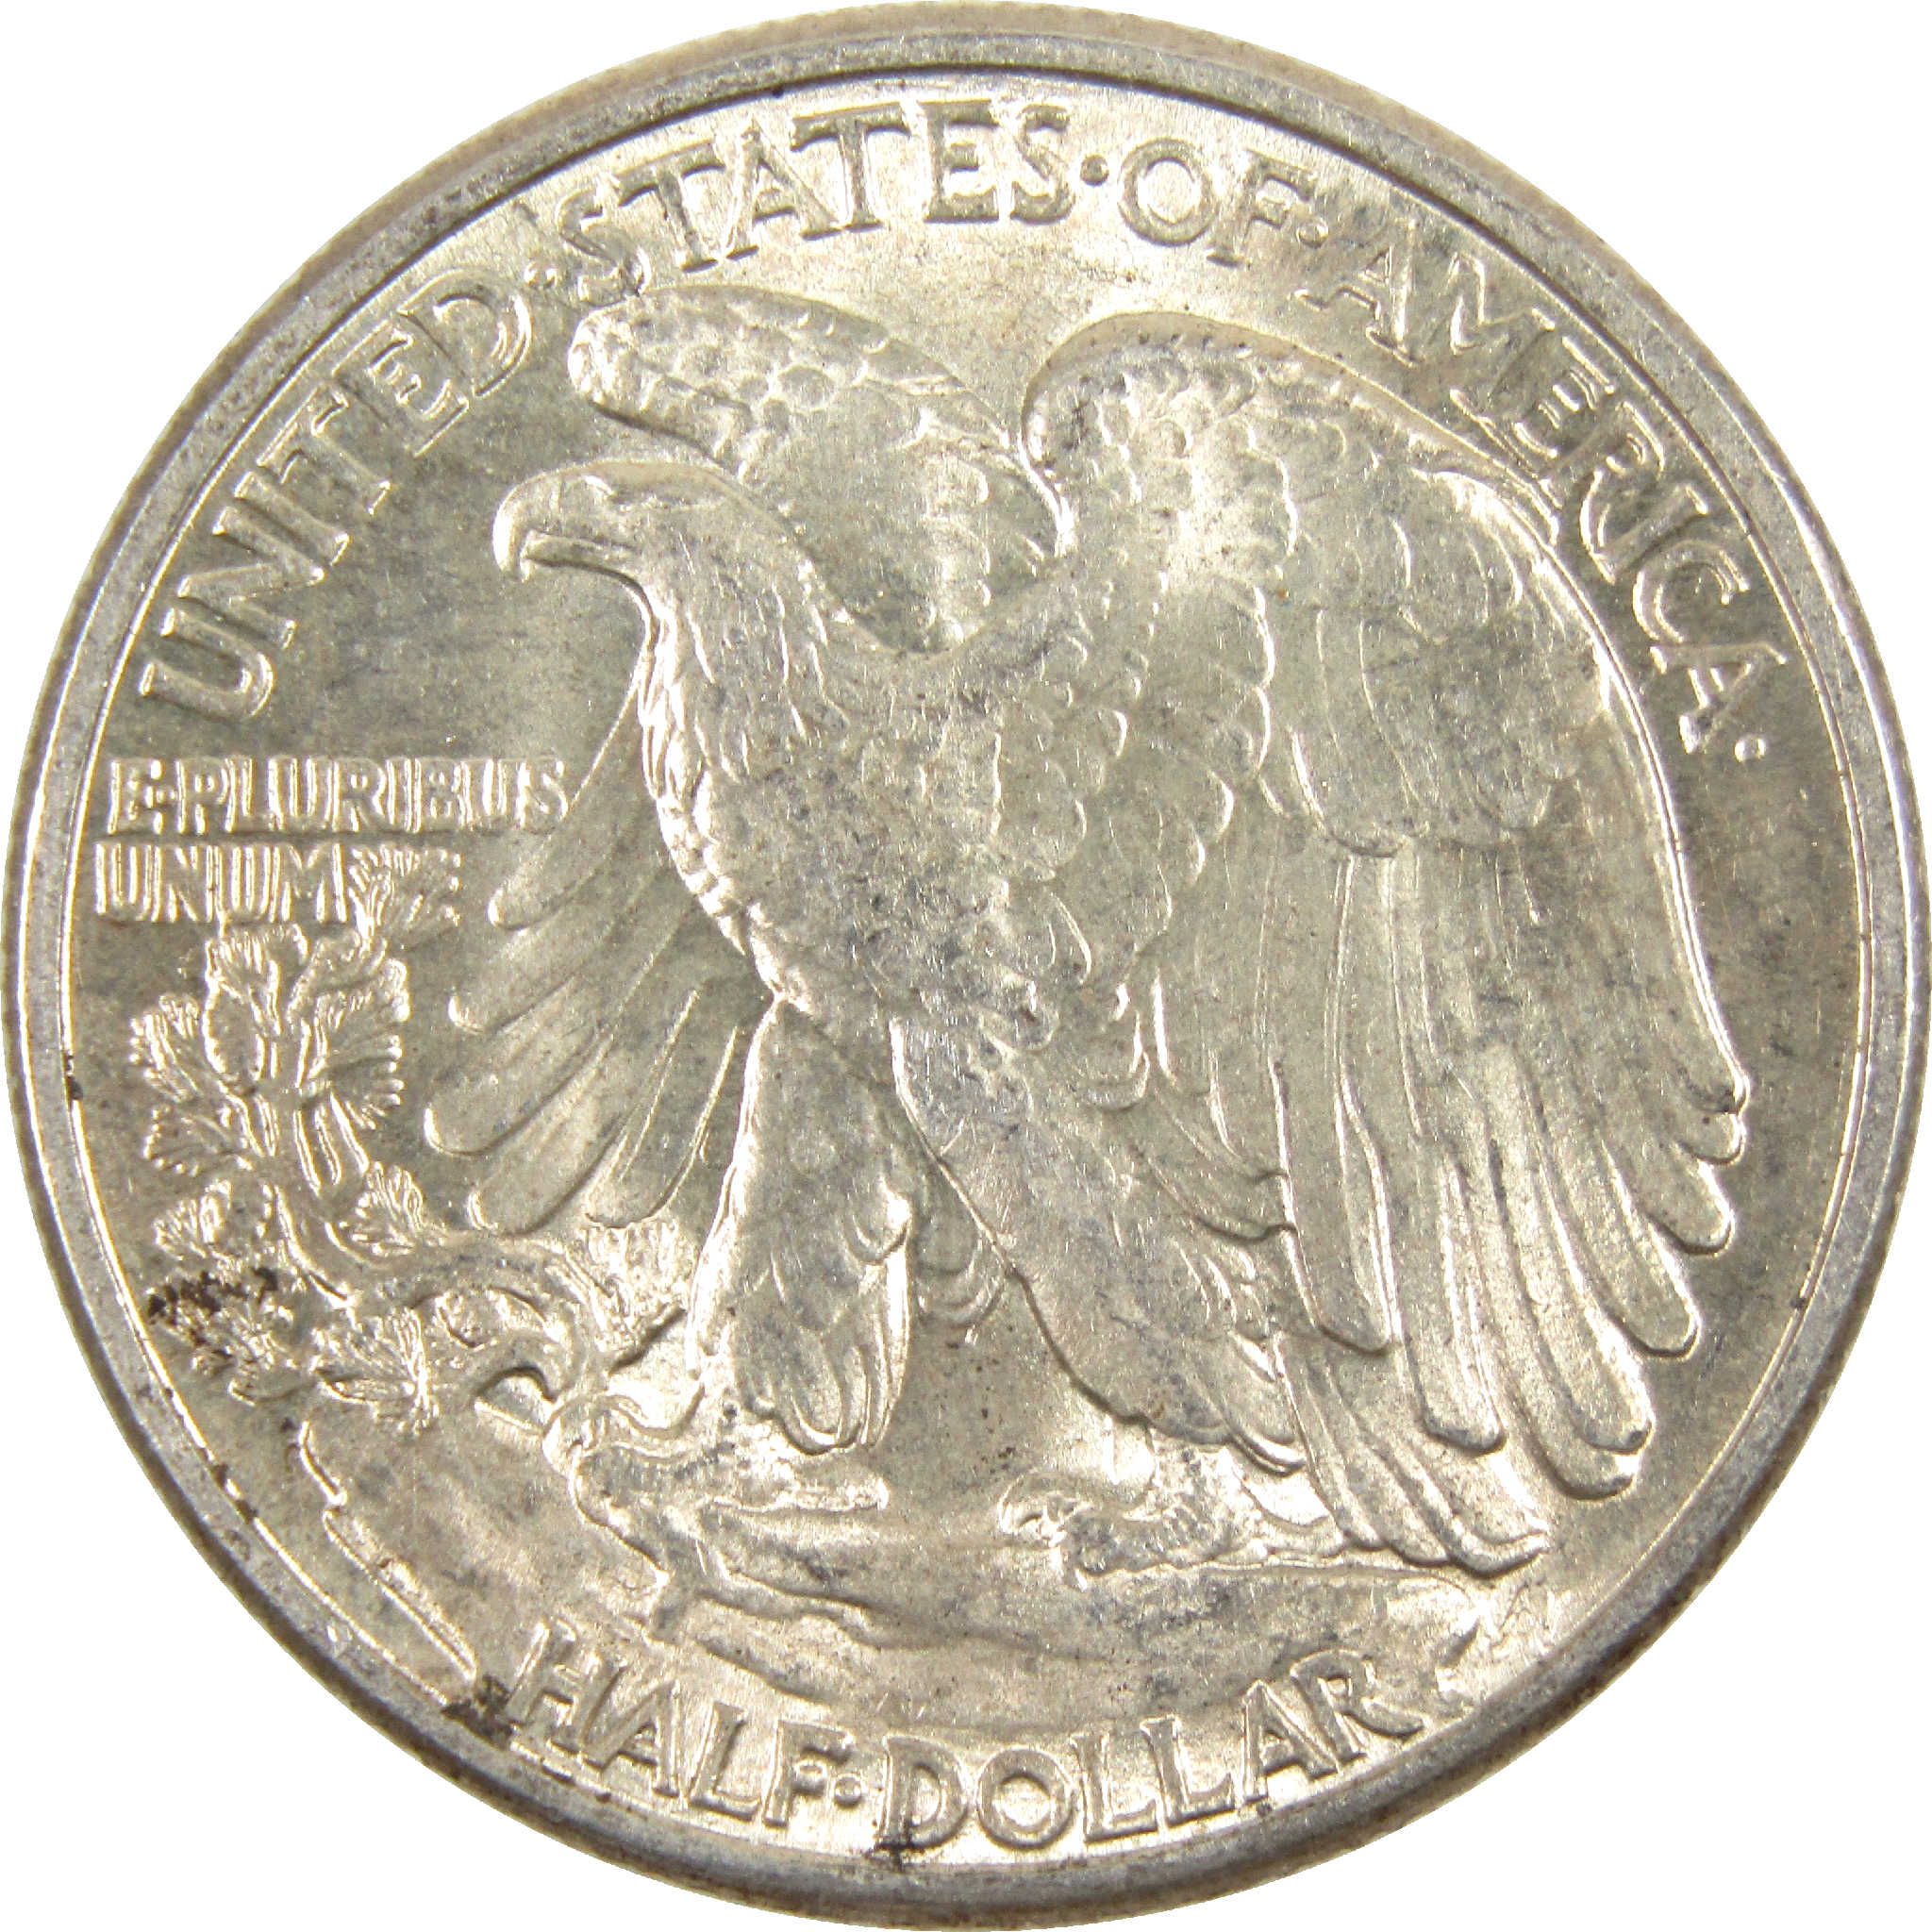 1944 Liberty Walking Half Dollar AU About Uncirculated Silver 50c Coin